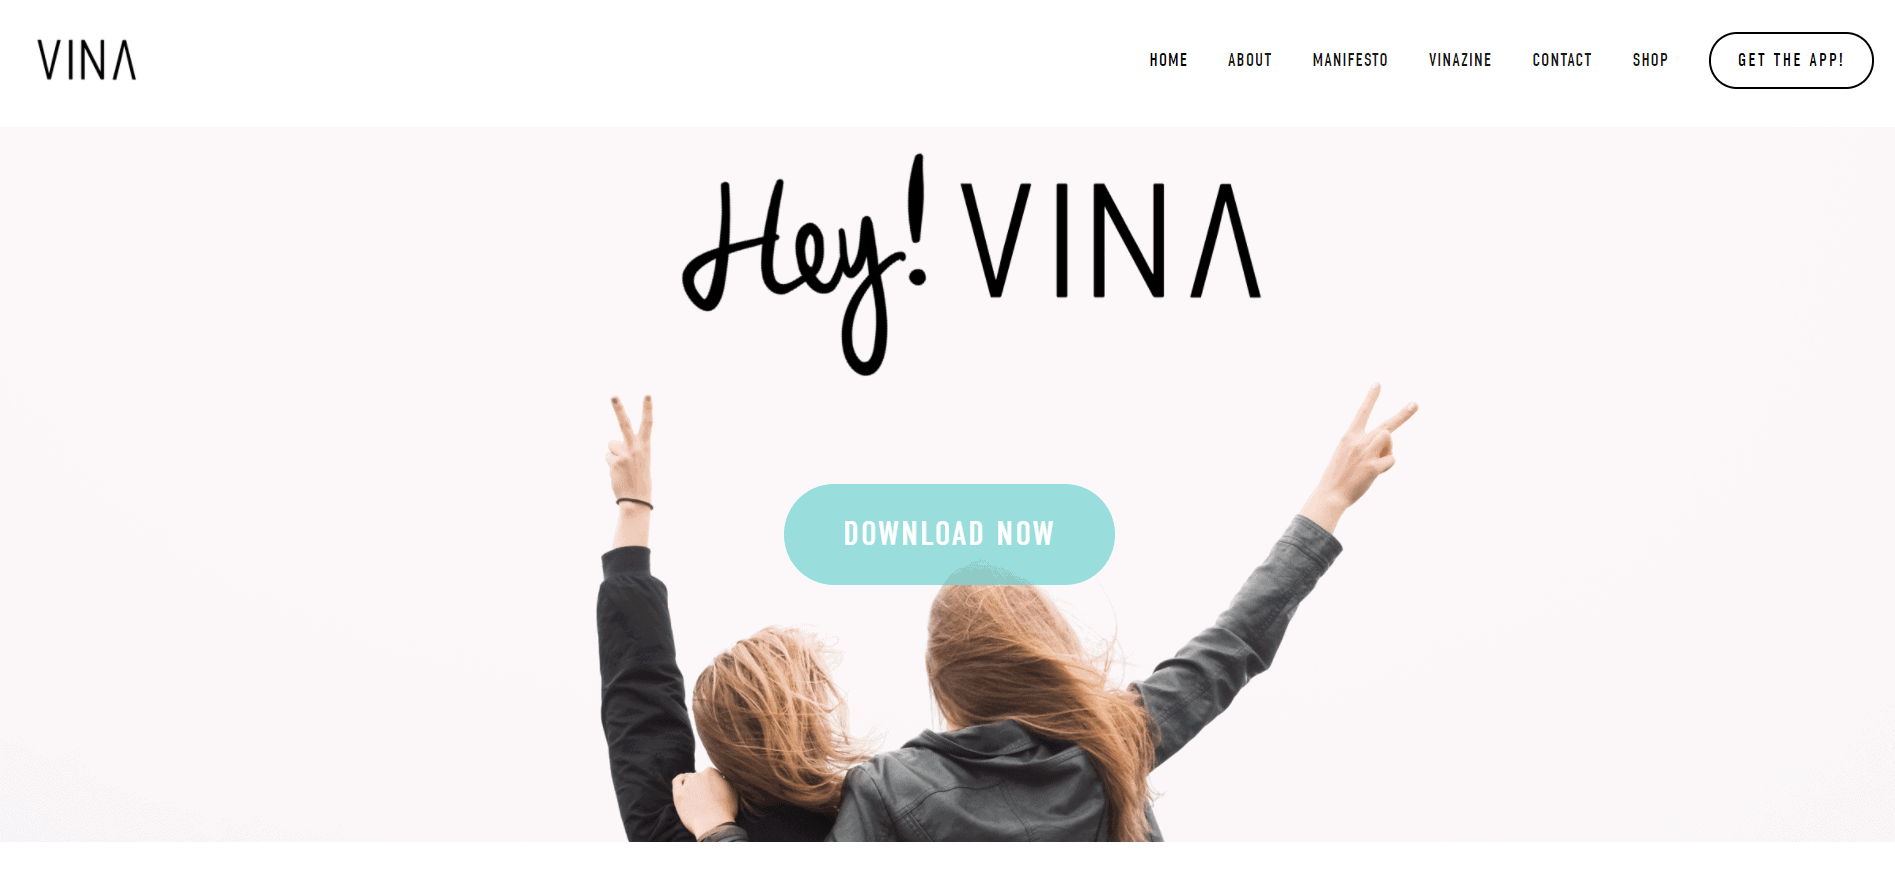 hey vina -6 Apps for Making Friends in a New City